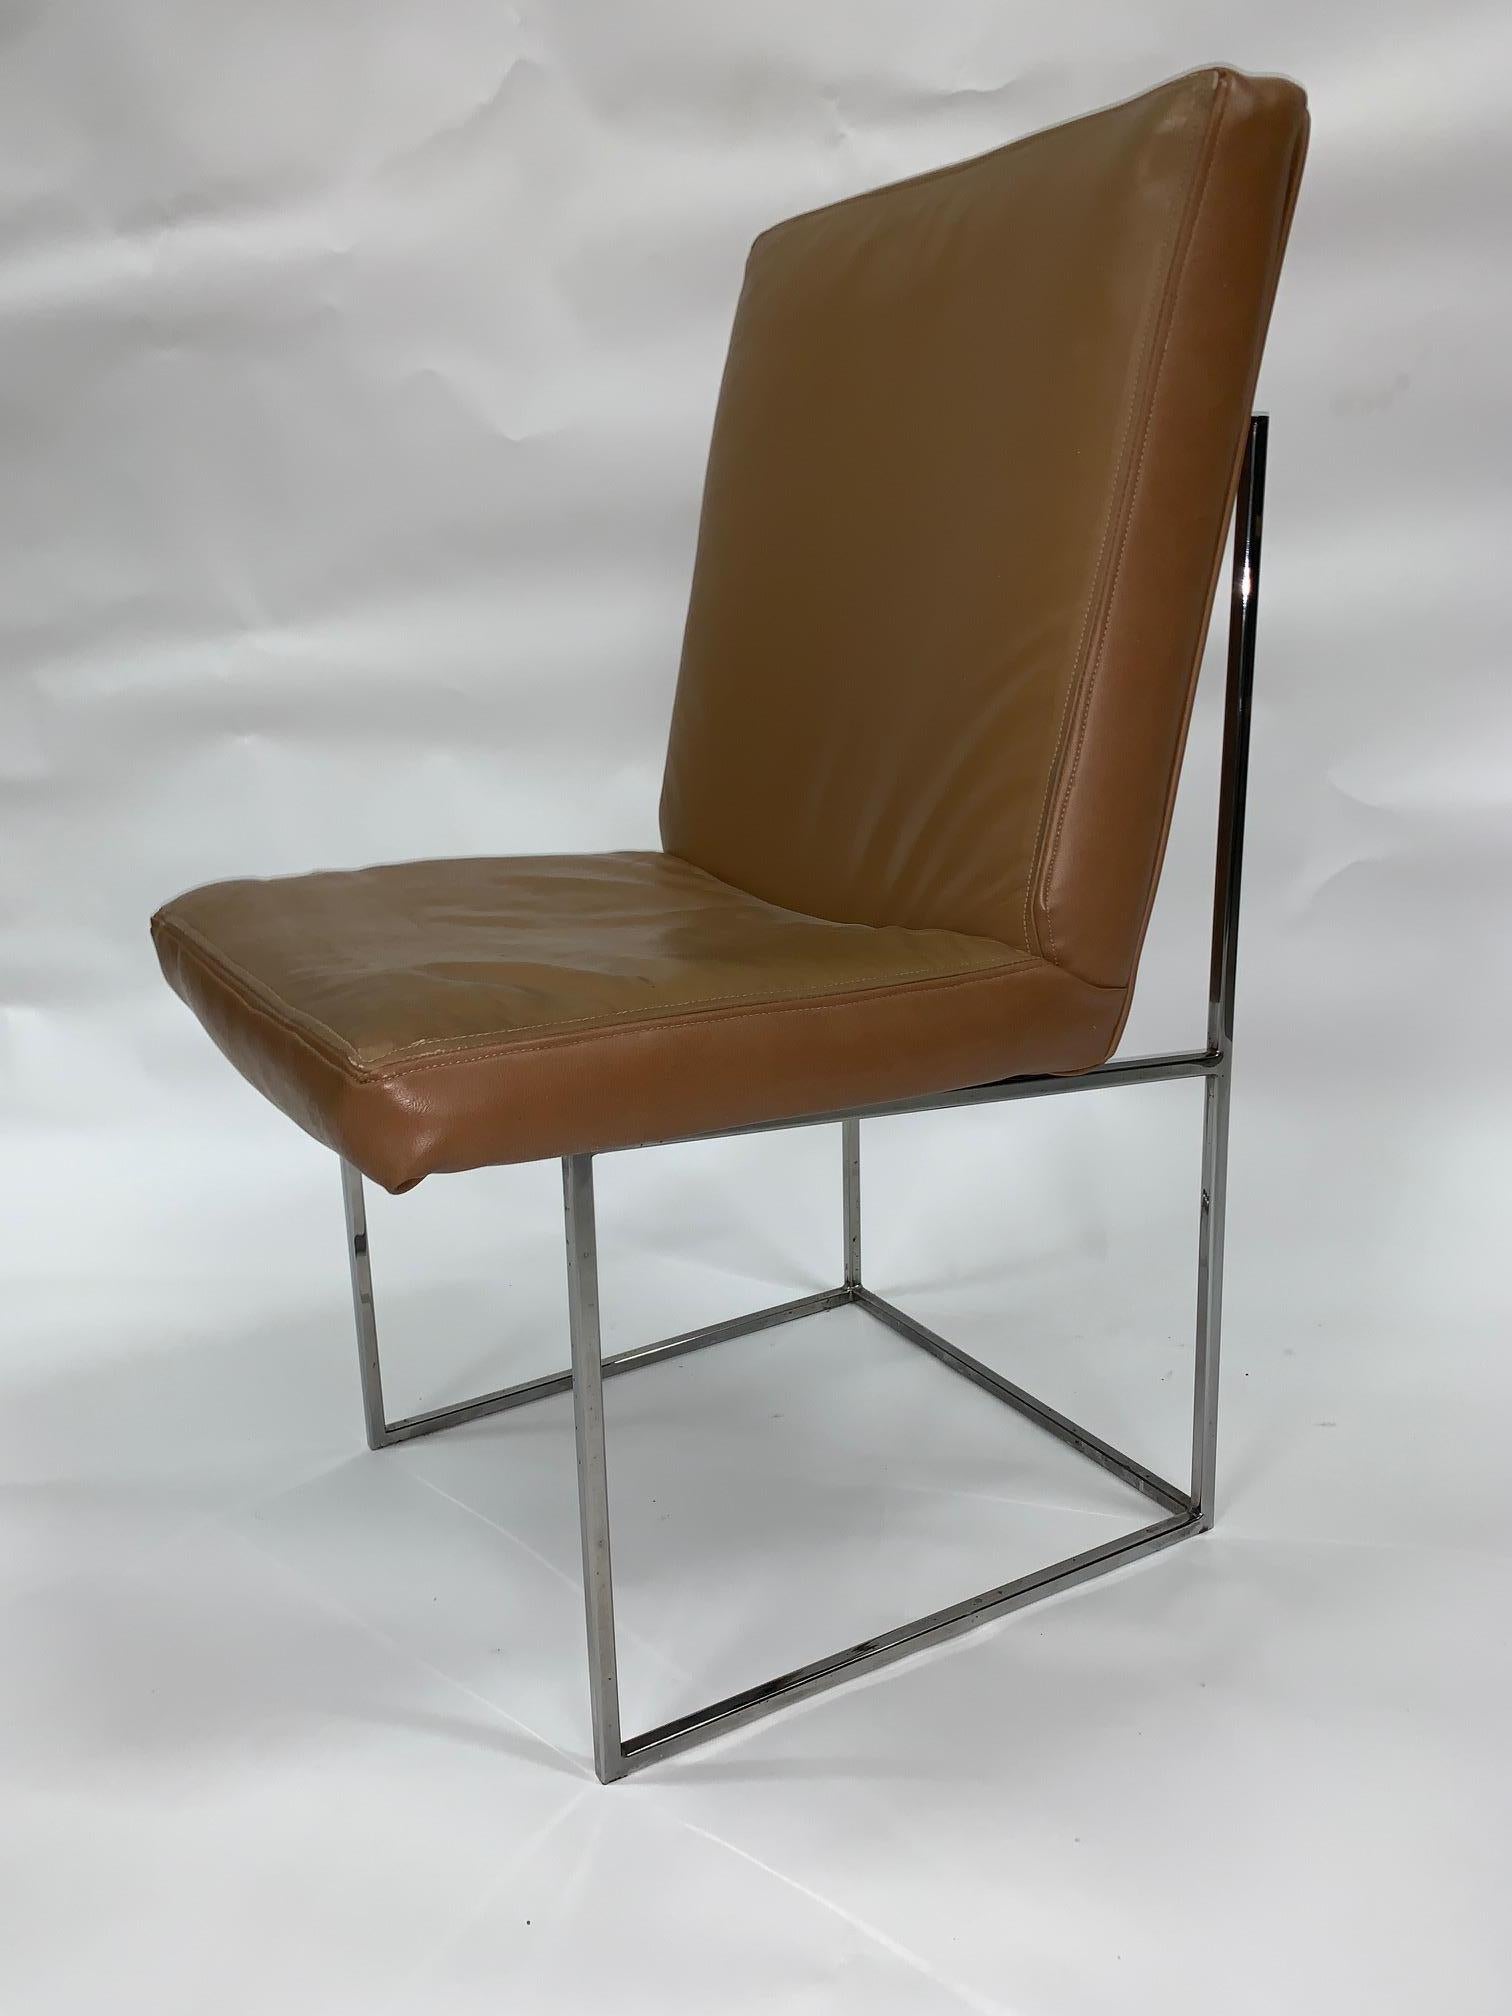 4 Leather Milo Baughman Dining Chairs -original leather In Good Condition For Sale In Houston, TX